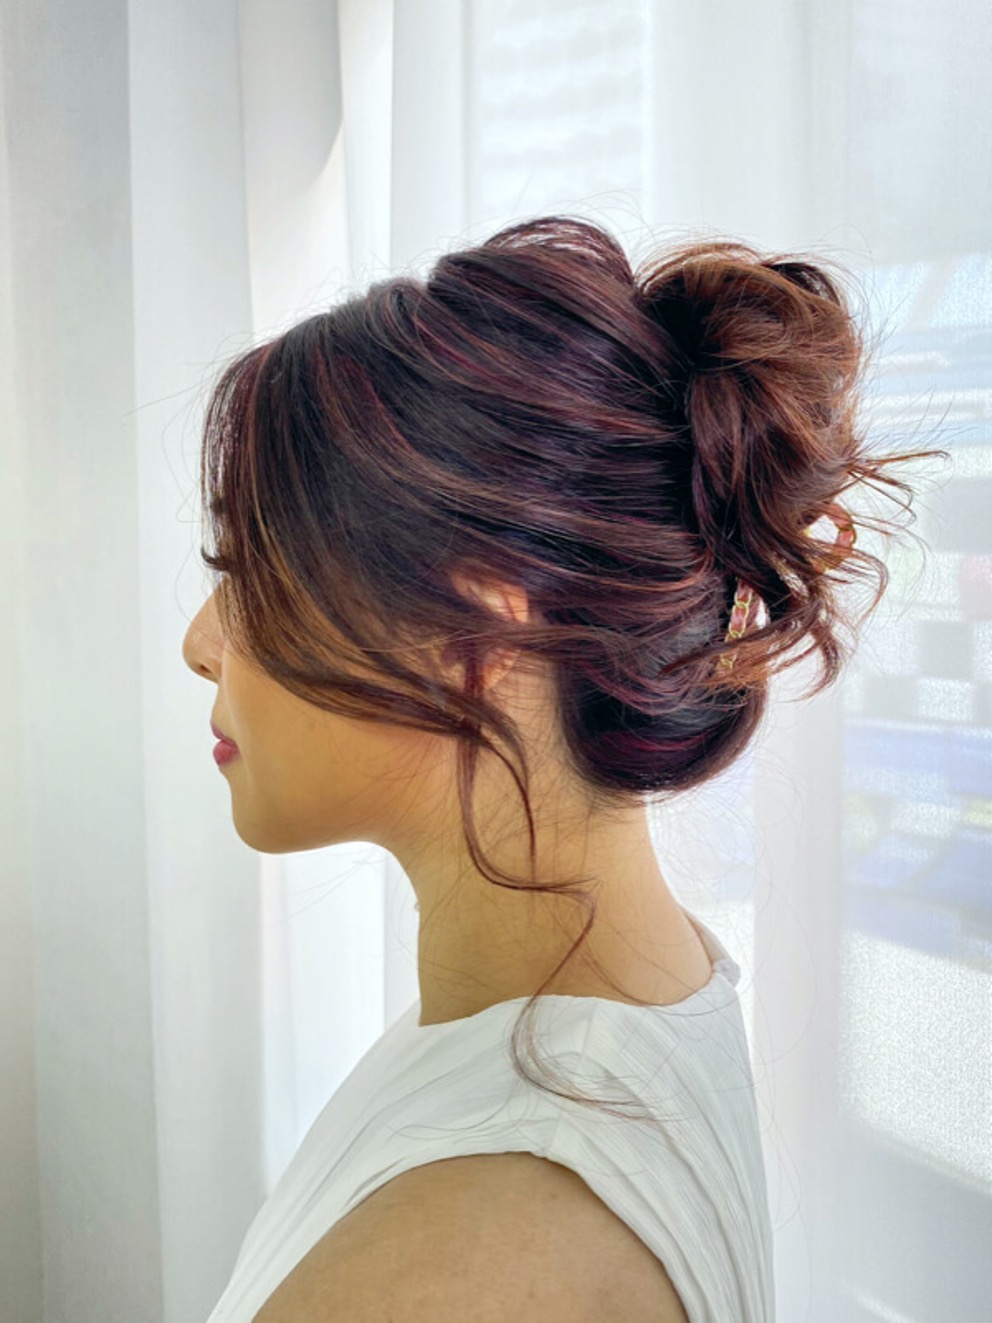 Hair Colour Trend 2022: Rose Brown Falling Stars Highlights designed by Director of Chez Vous Hair Salon, Luis Wee